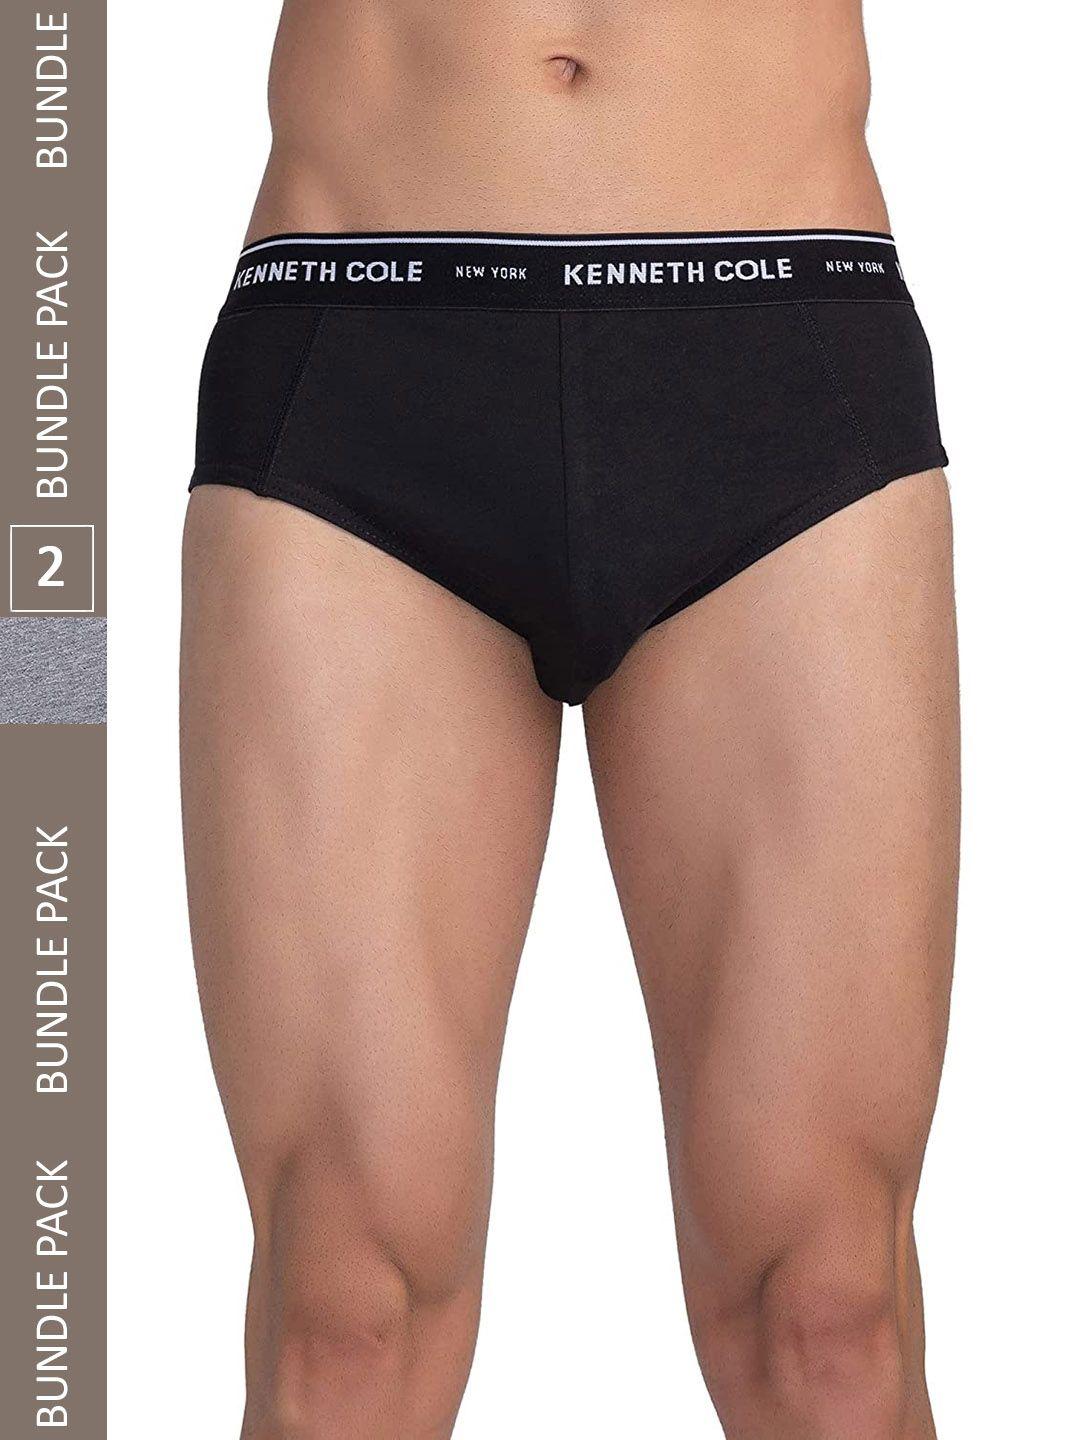 kenneth cole men pack of 2 assorted cotton basic briefs